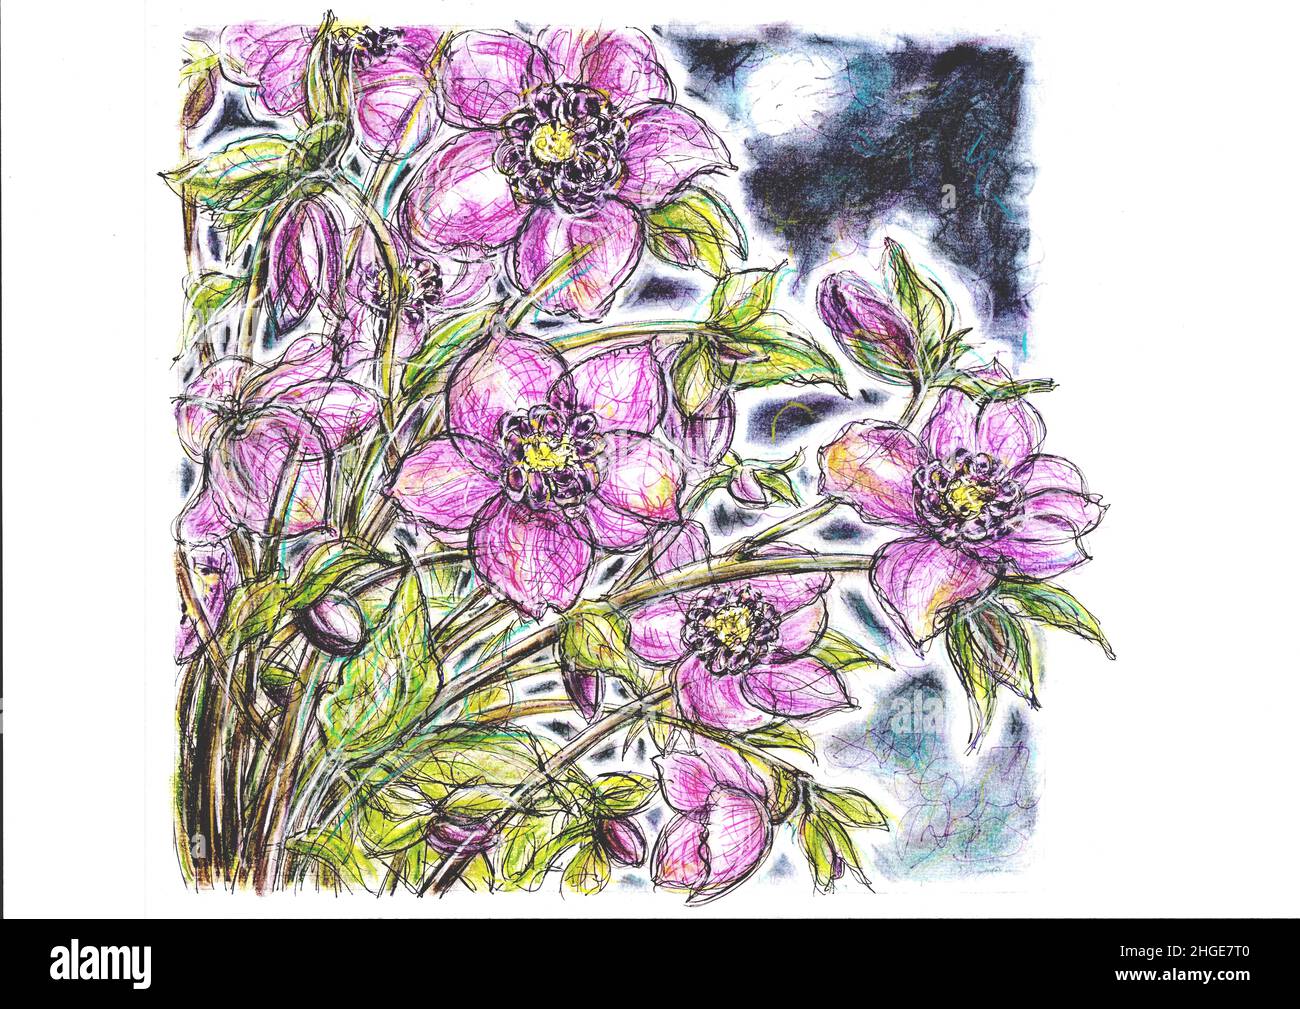 Illustration of pink hellebores in full bloom. Stock Photo